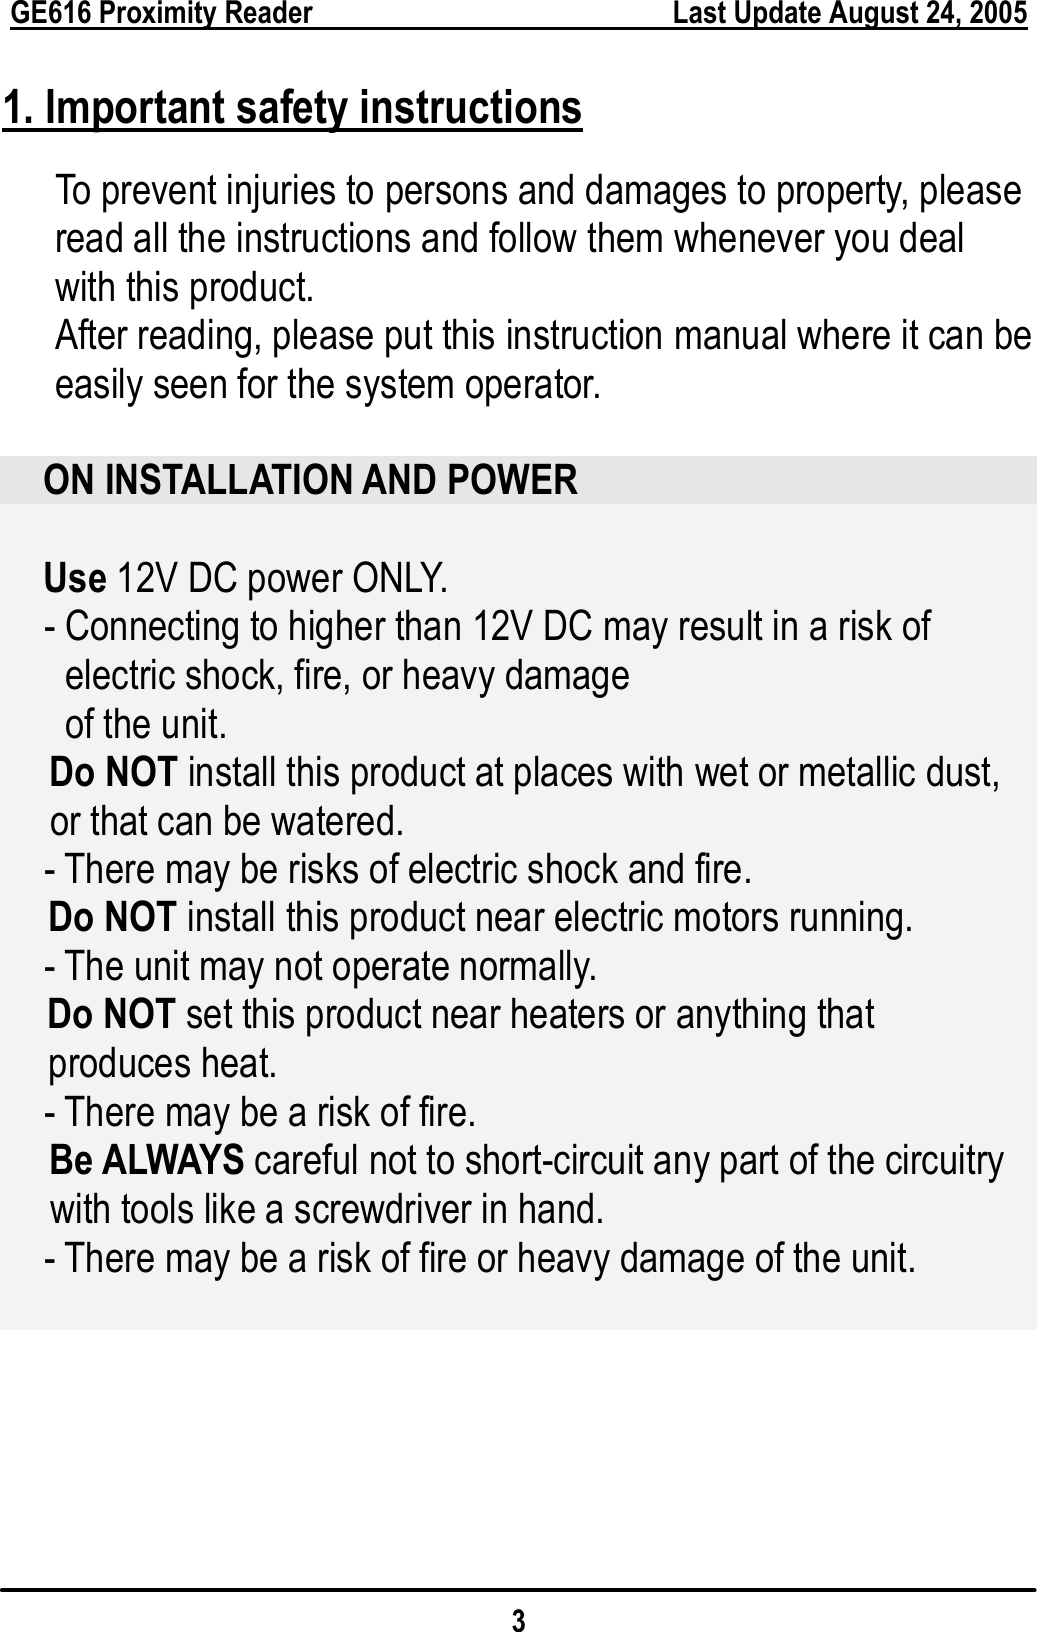  GE616 Proximity Reader        Last Update August 24, 2005 3 1. Important safety instructions To prevent injuries to persons and damages to property, please read all the instructions and follow them whenever you deal with this product. After reading, please put this instruction manual where it can be easily seen for the system operator.  ON INSTALLATION AND POWER  Use 12V DC power ONLY. - Connecting to higher than 12V DC may result in a risk of   electric shock, fire, or heavy damage   of the unit. Do NOT install this product at places with wet or metallic dust, or that can be watered. - There may be risks of electric shock and fire. Do NOT install this product near electric motors running. - The unit may not operate normally. Do NOT set this product near heaters or anything that   produces heat. - There may be a risk of fire. Be ALWAYS careful not to short-circuit any part of the circuitry   with tools like a screwdriver in hand. - There may be a risk of fire or heavy damage of the unit.          